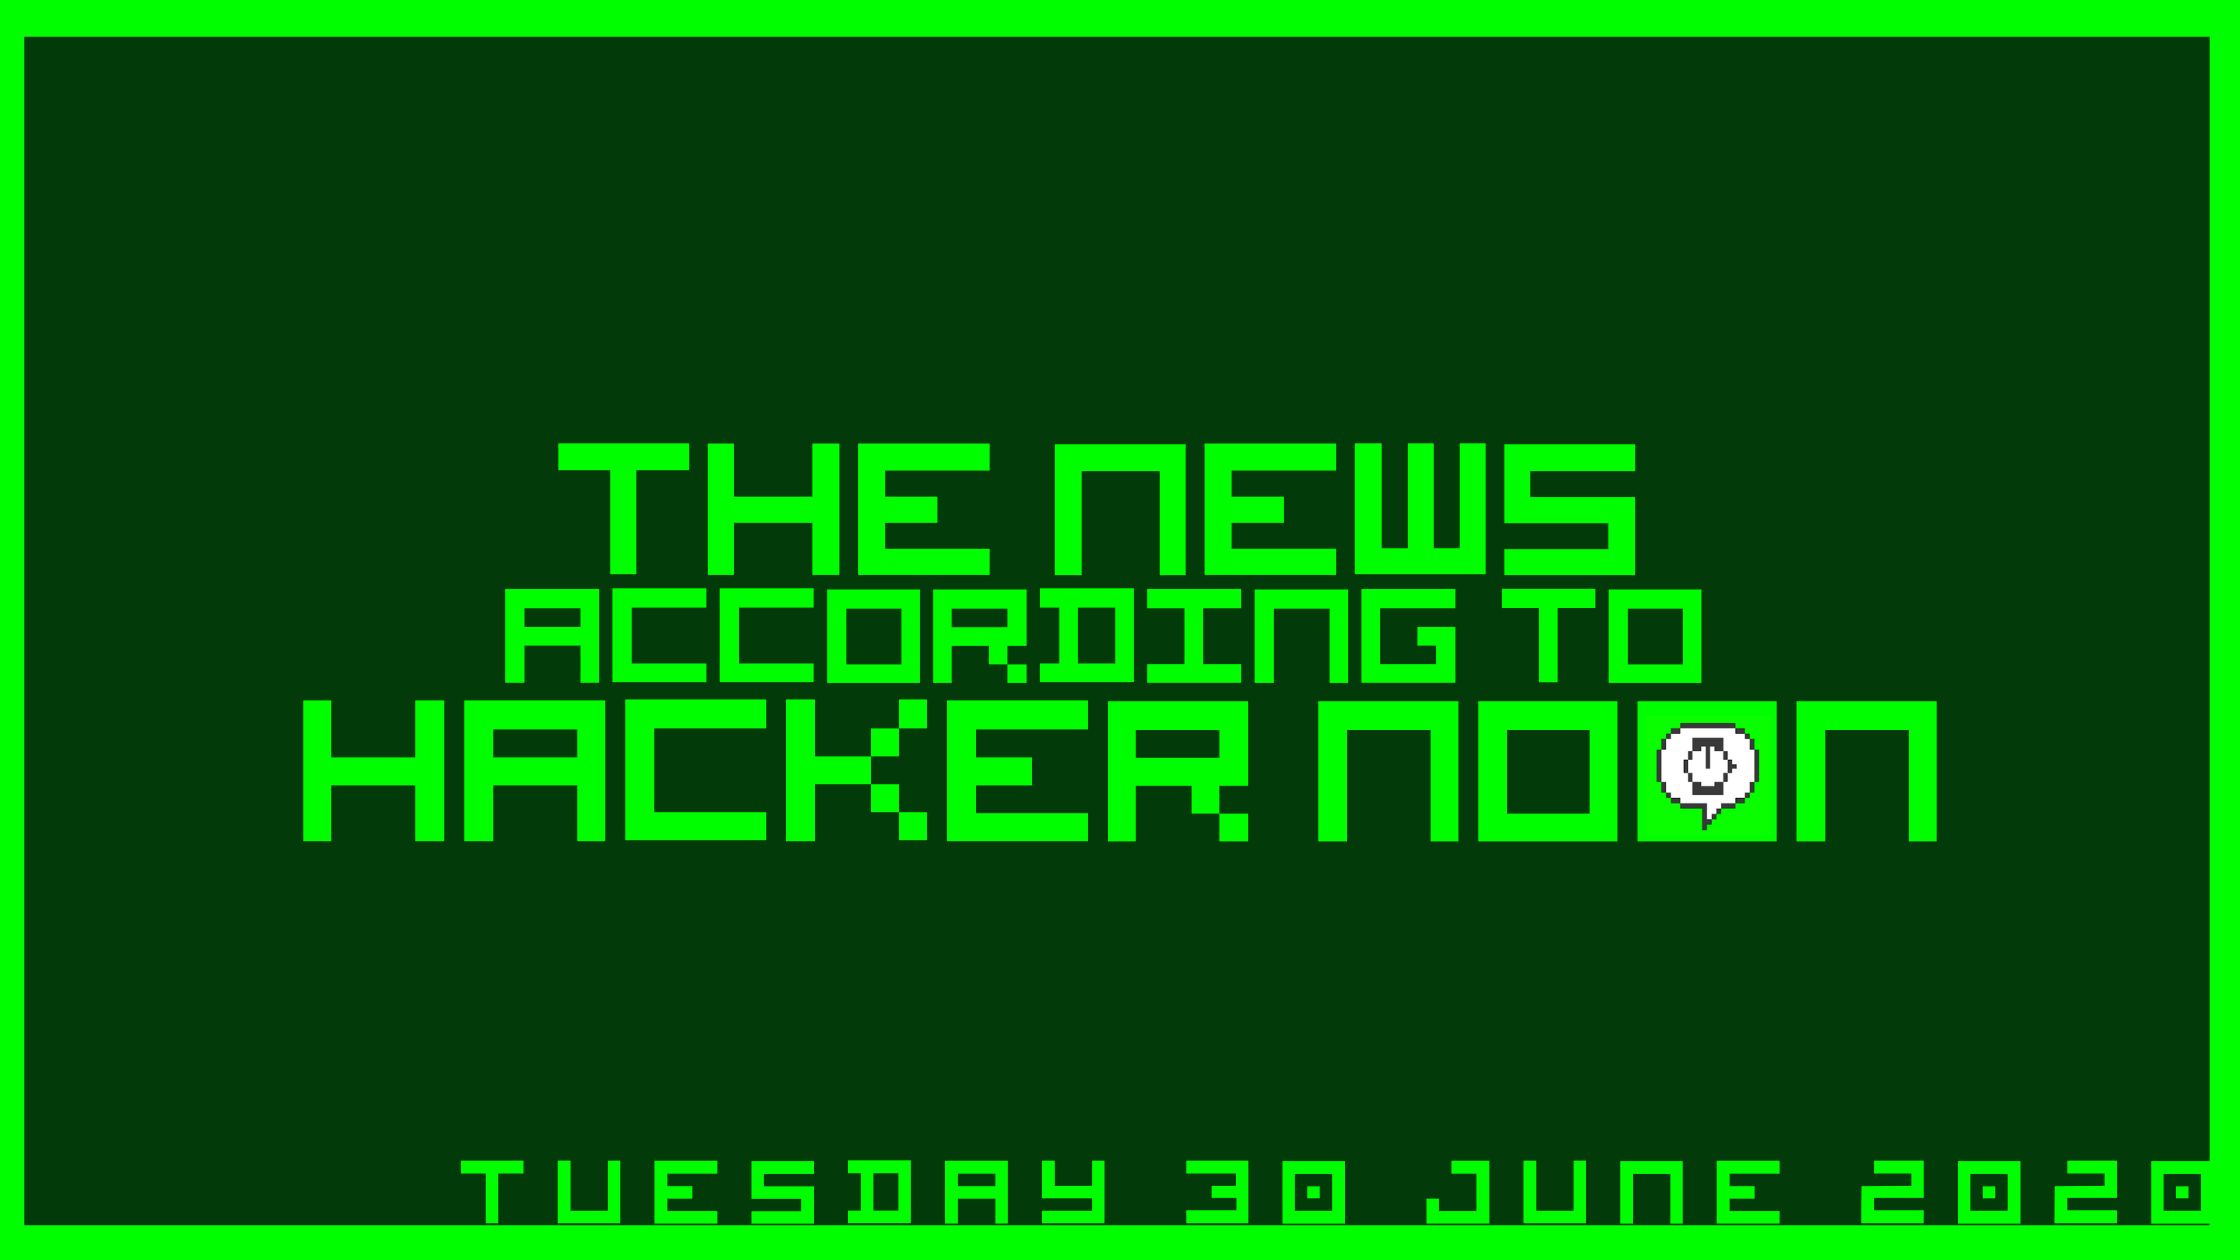 featured image - The News According to Hacker Noon — Tuesday, 30 June 2020